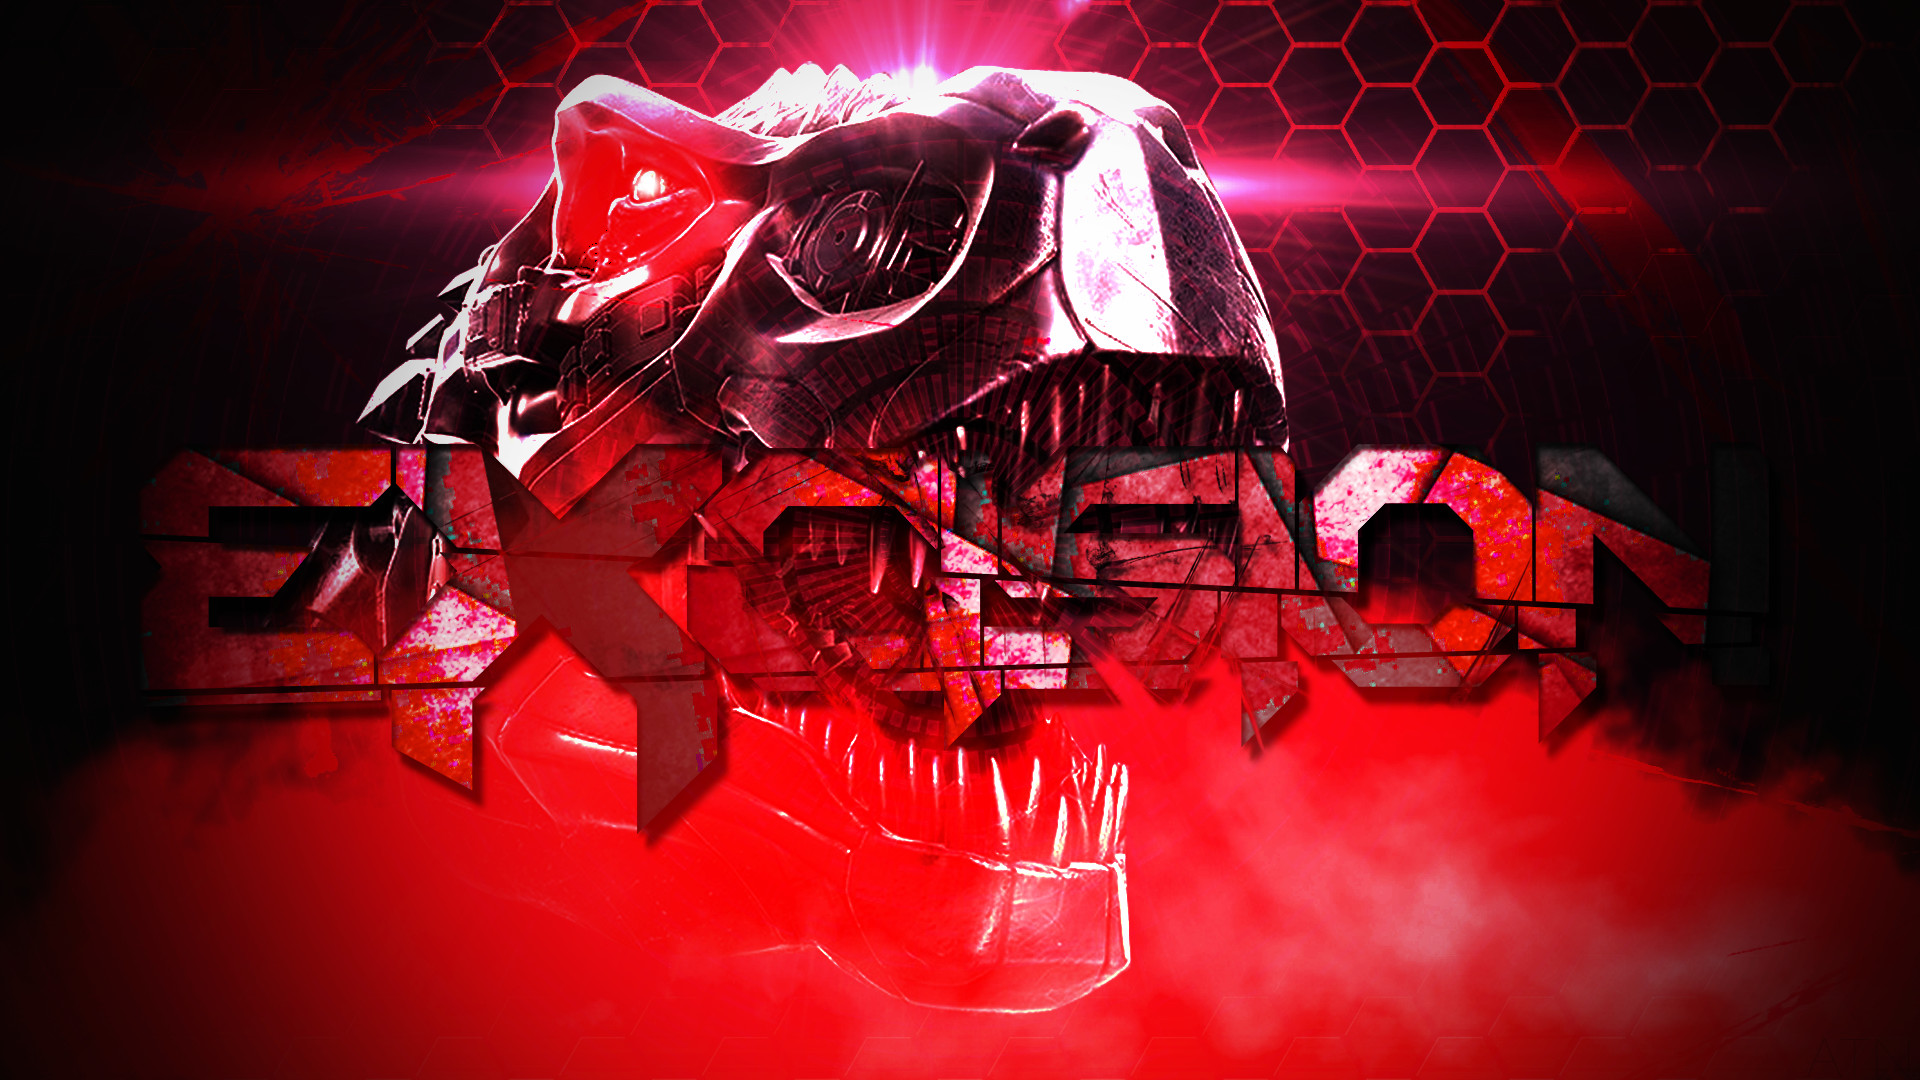 1920x1080 solidsoulart 9 0 Excision Wallpaper by ATNDesign